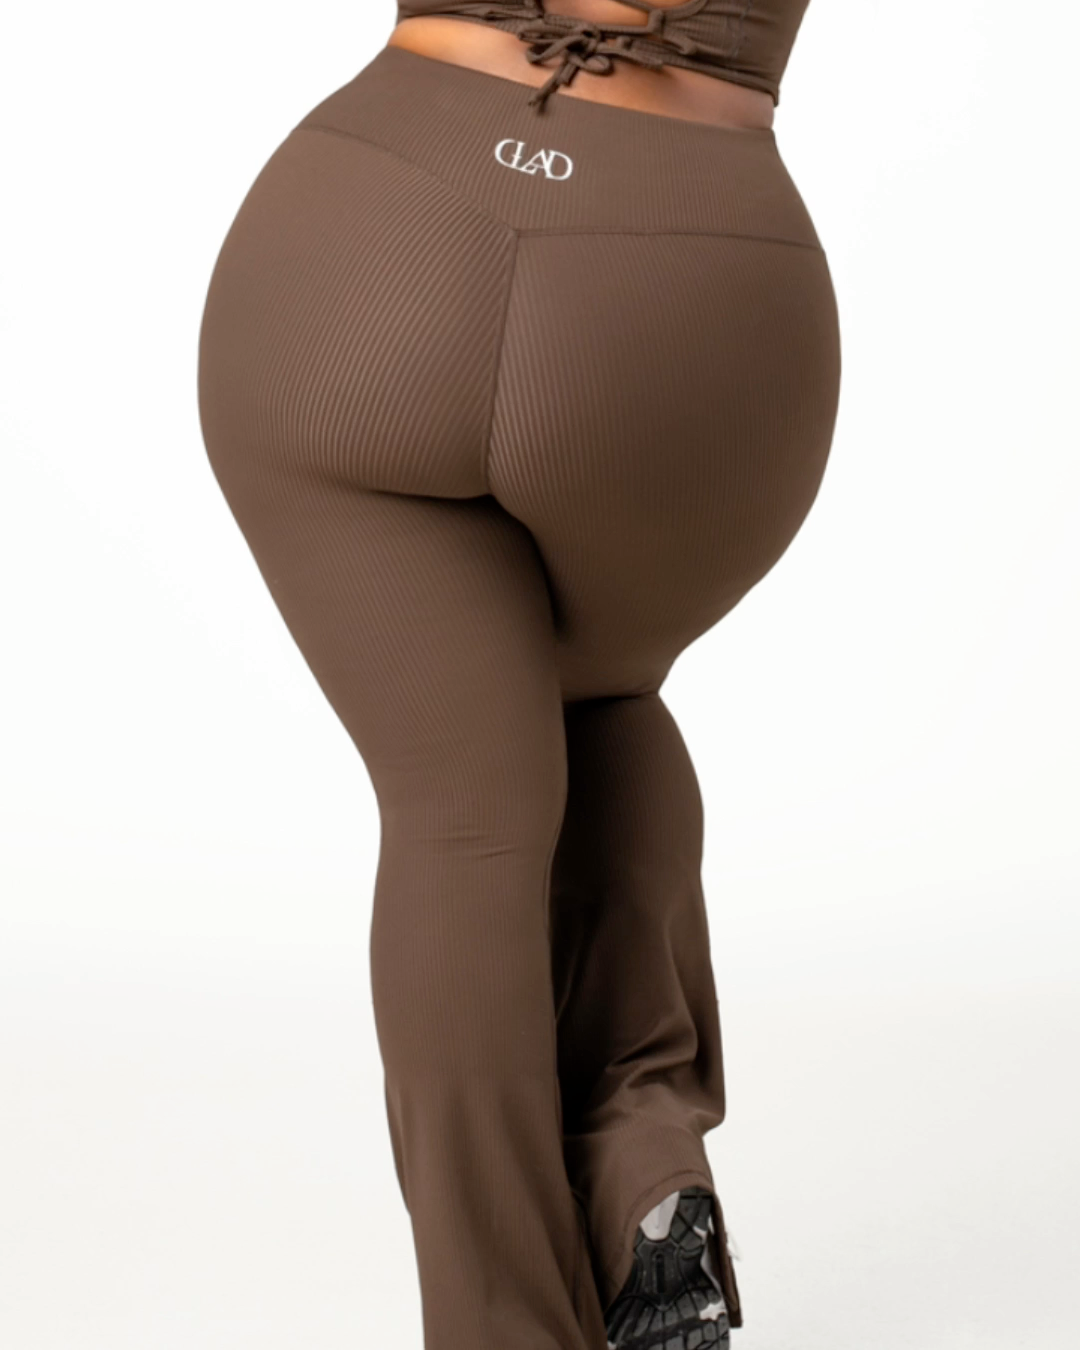 These brown flared leggings are so comfortable!! @Target 🤎 #leggings, flared leggings